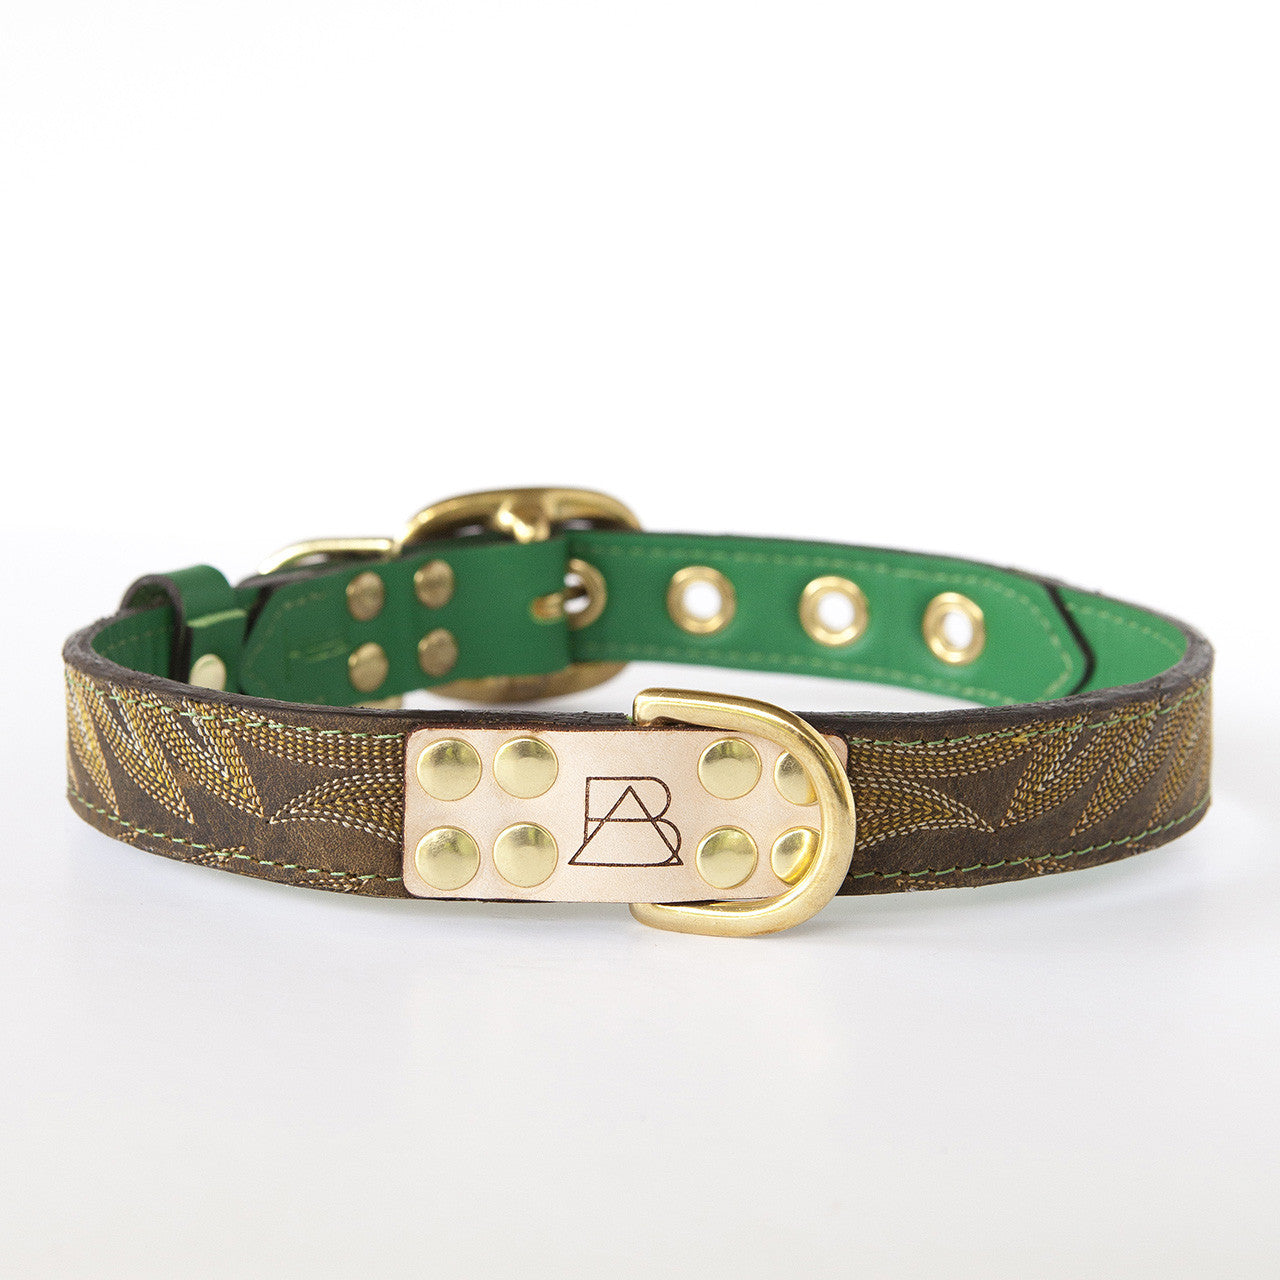 Emerald Green Dog Collar with Dark Brown Leather + Yellow and Tan Stitching (front view)